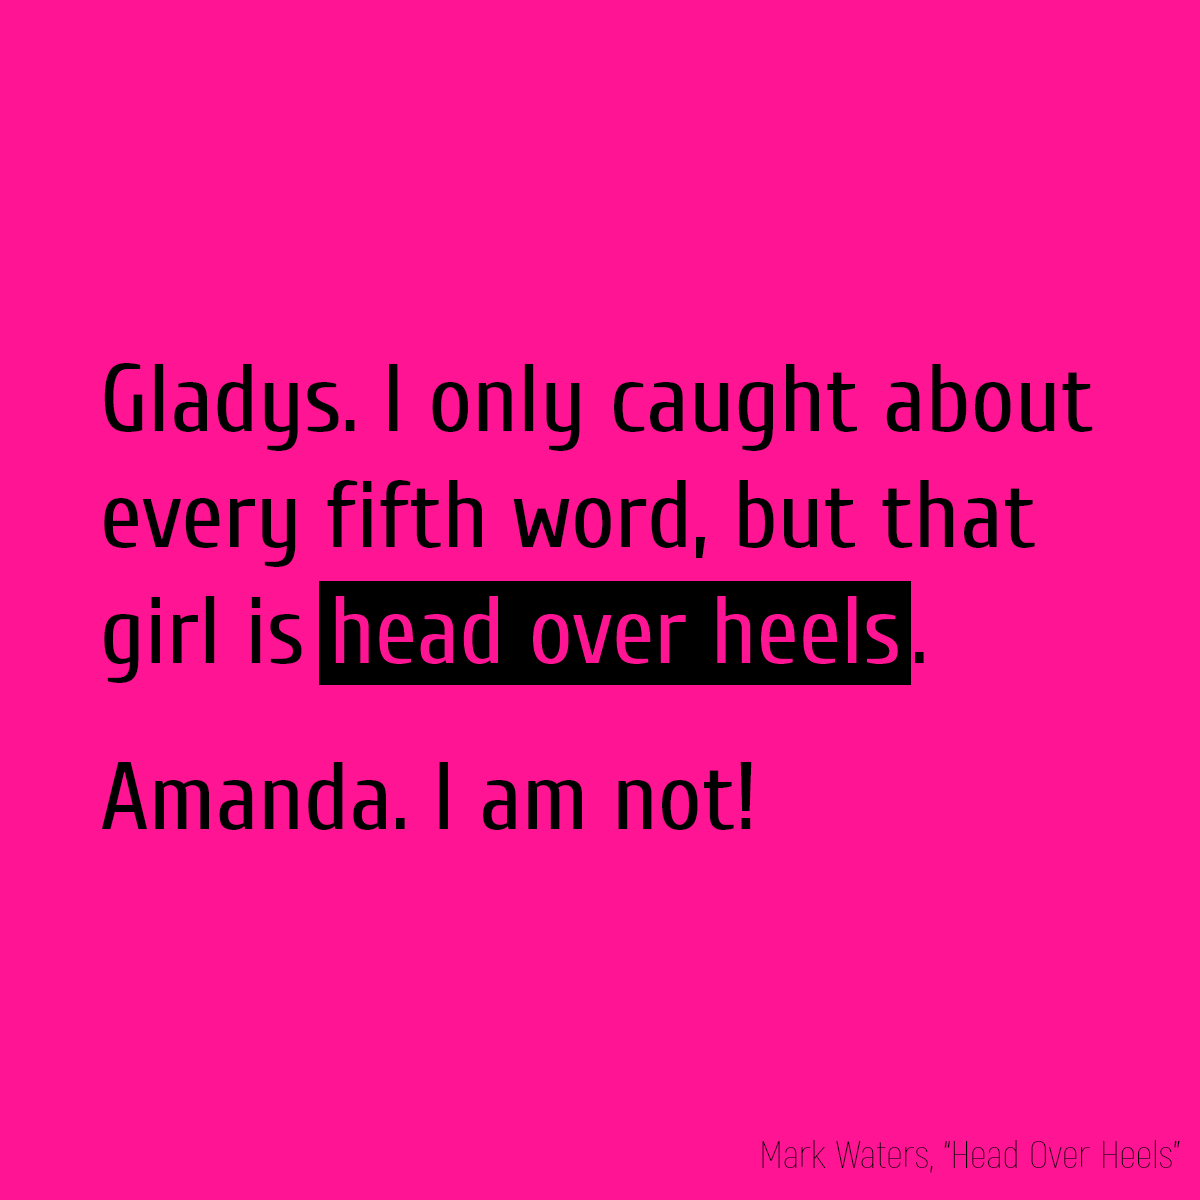 Gladys. I only caught about every fifth word, but that girl is **head over heels**. Amanda. I am not!